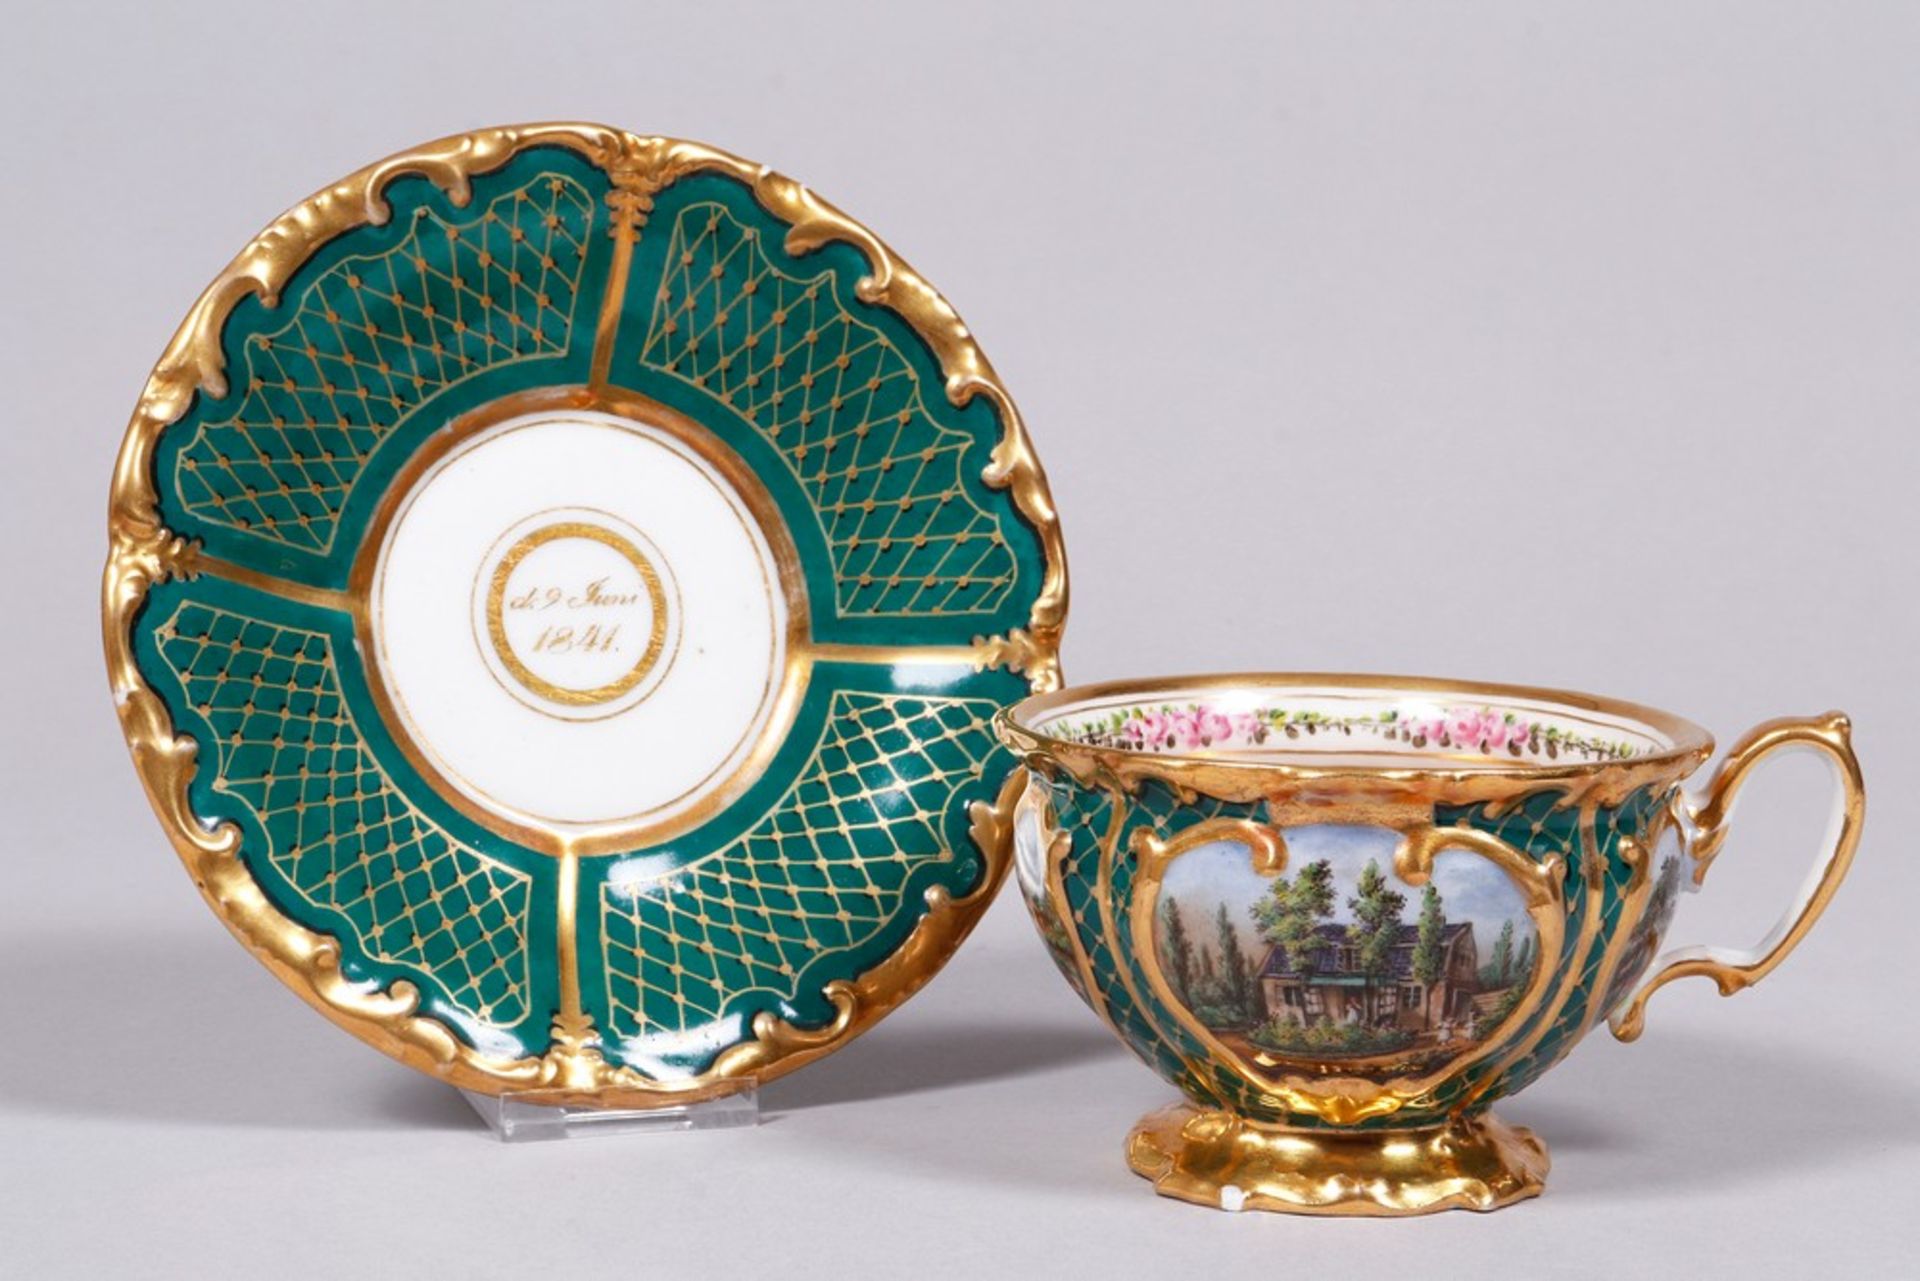 Biedermeier cup and saucer, probably Thuringia, ca. 1841